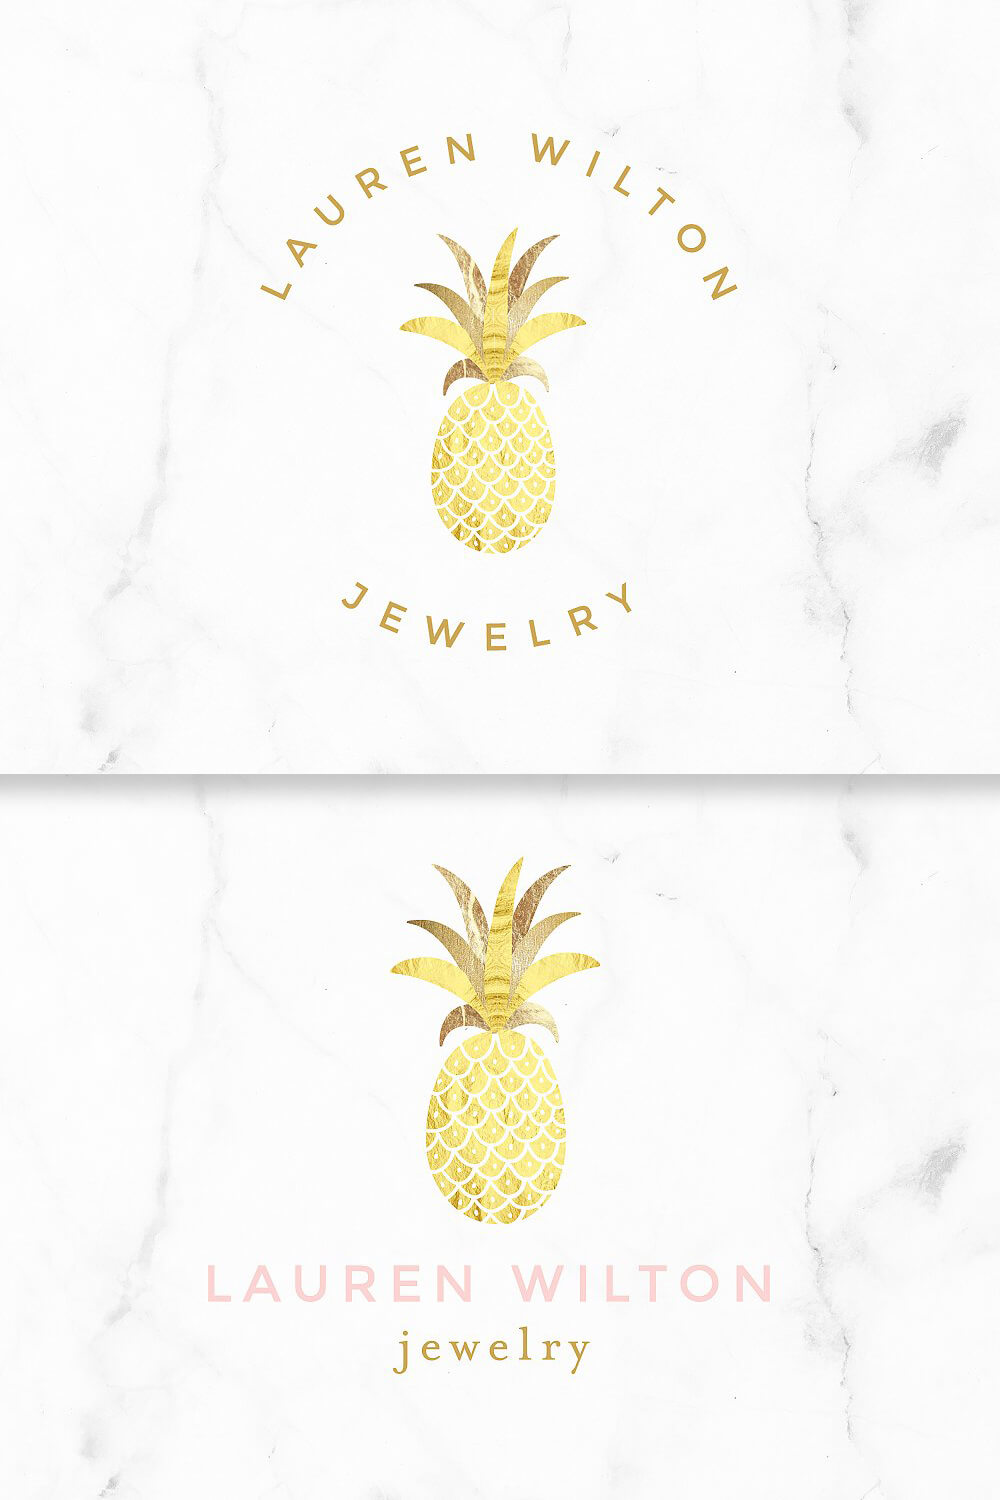 Drawing of the golden pineapple logo in two versions of the signature.